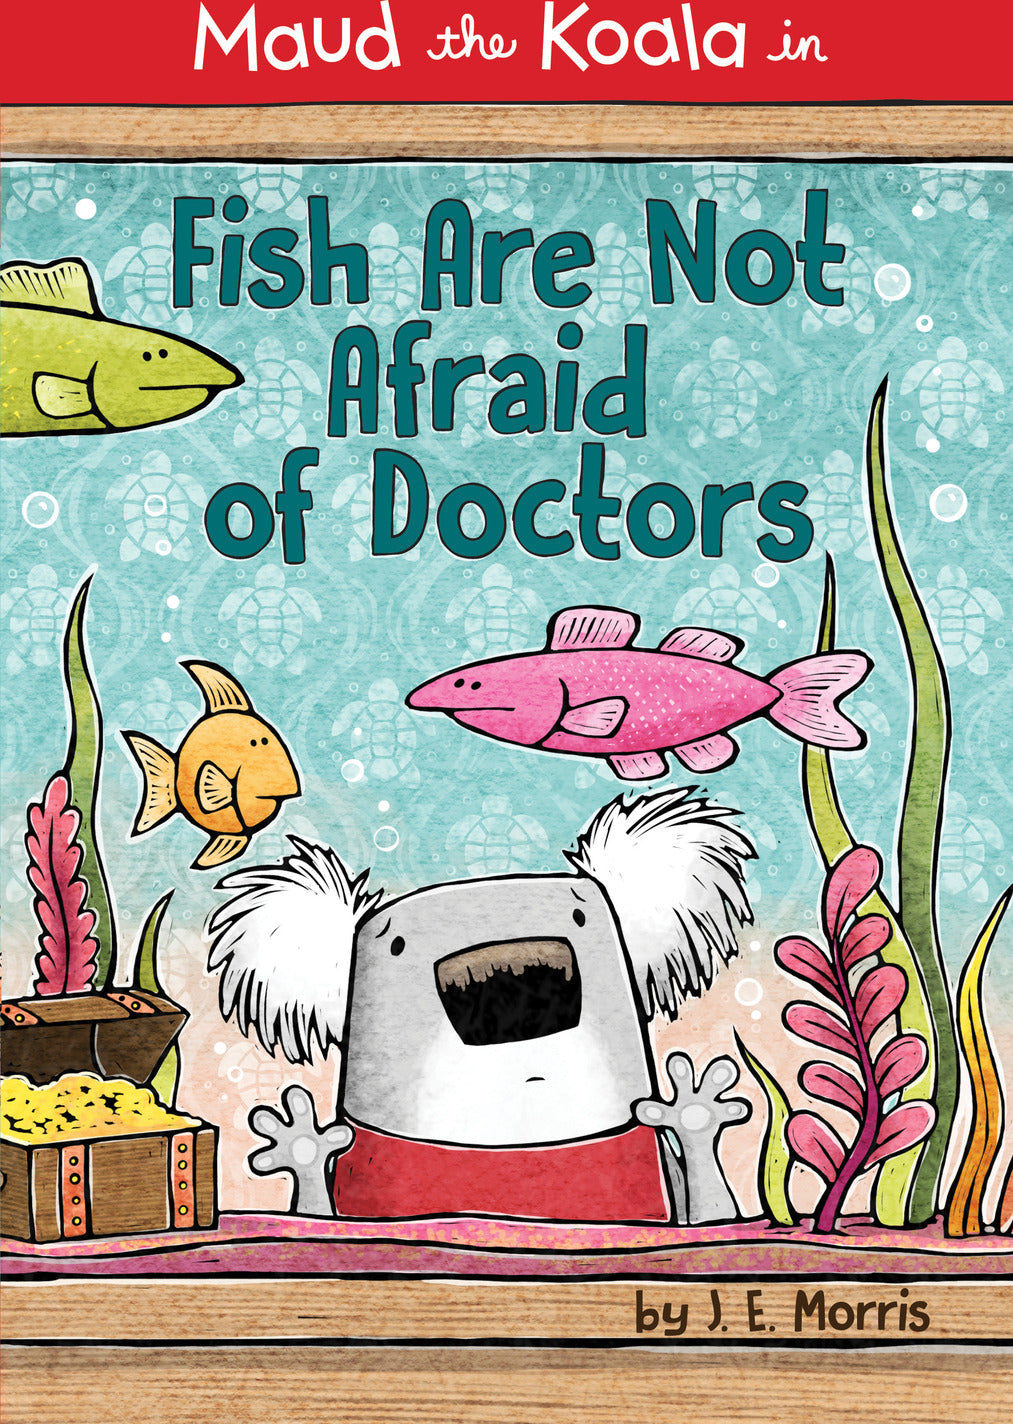 Fish Are Not Afraid of Doctors